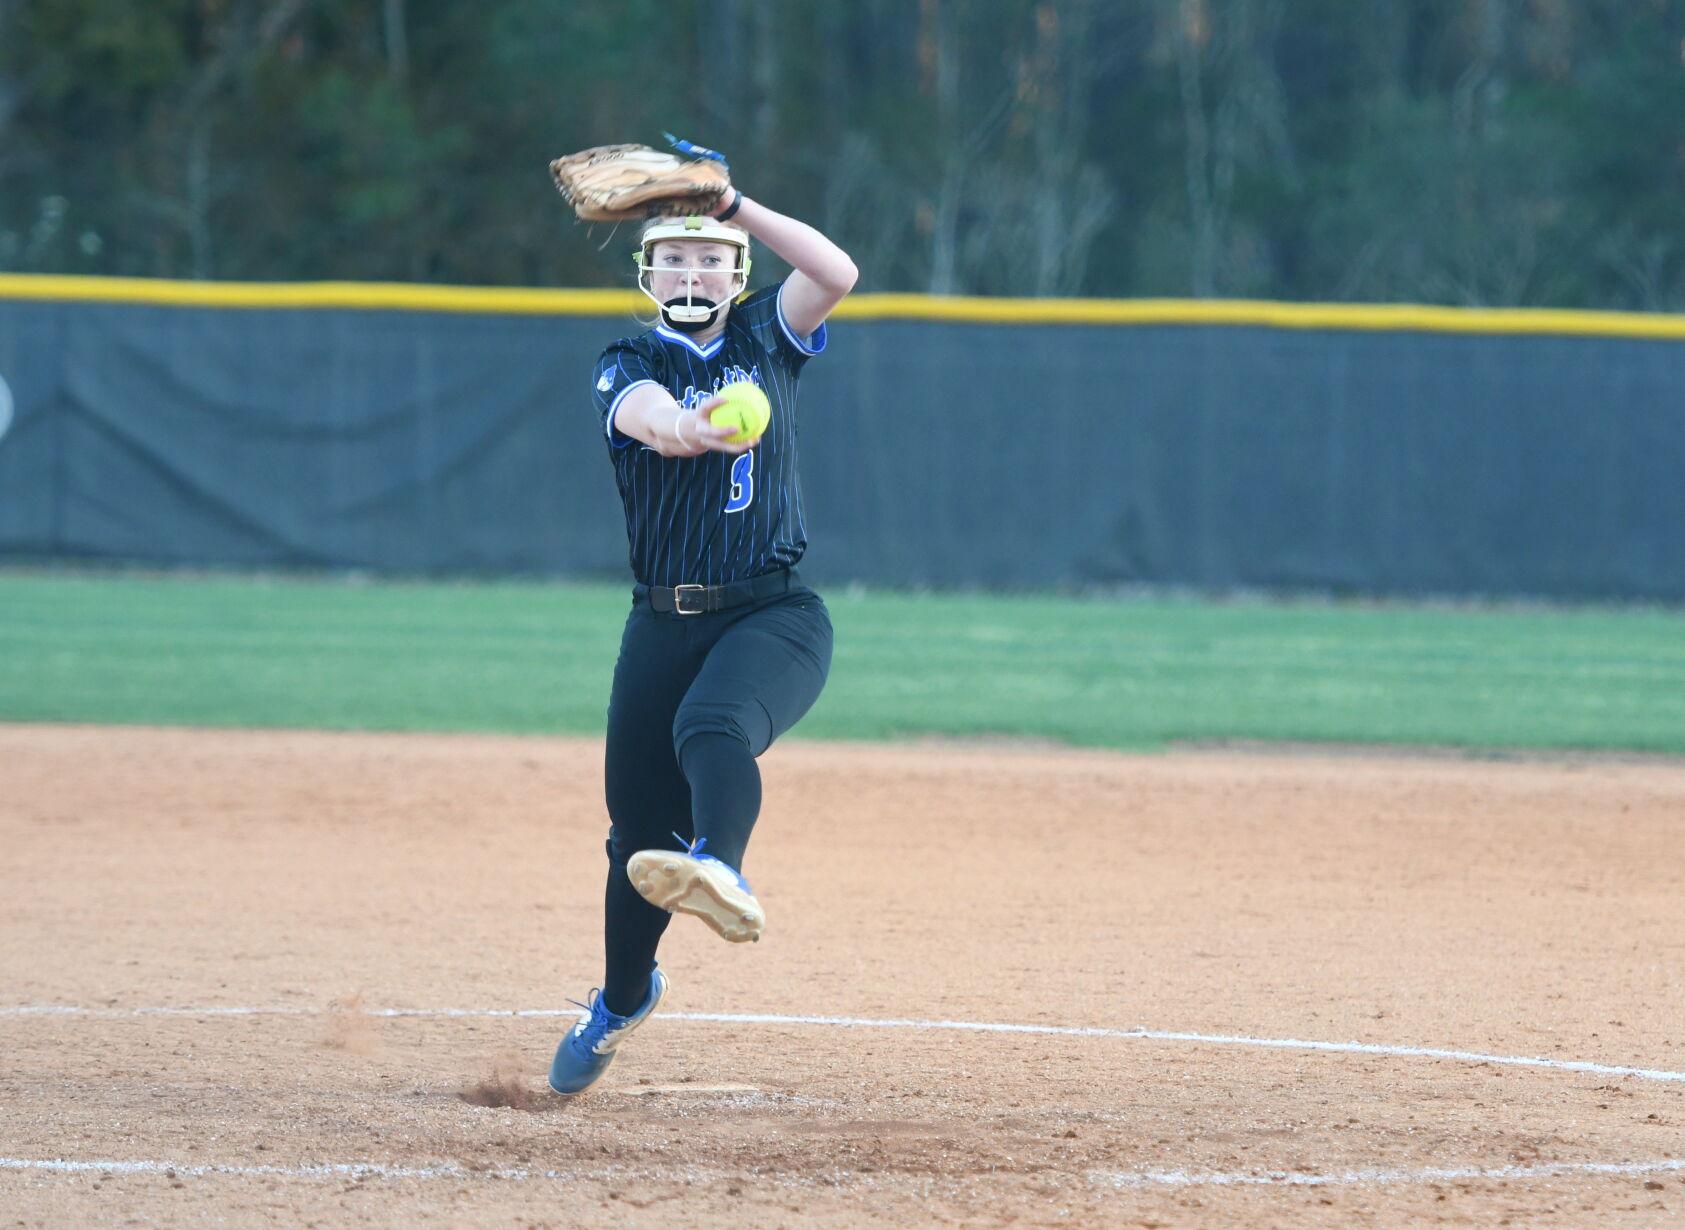 Fort Dorchester Softball Team Extends Winning Streak to 6-0 with Dramatic Extra-Innings Victory Over Ashley Ridge